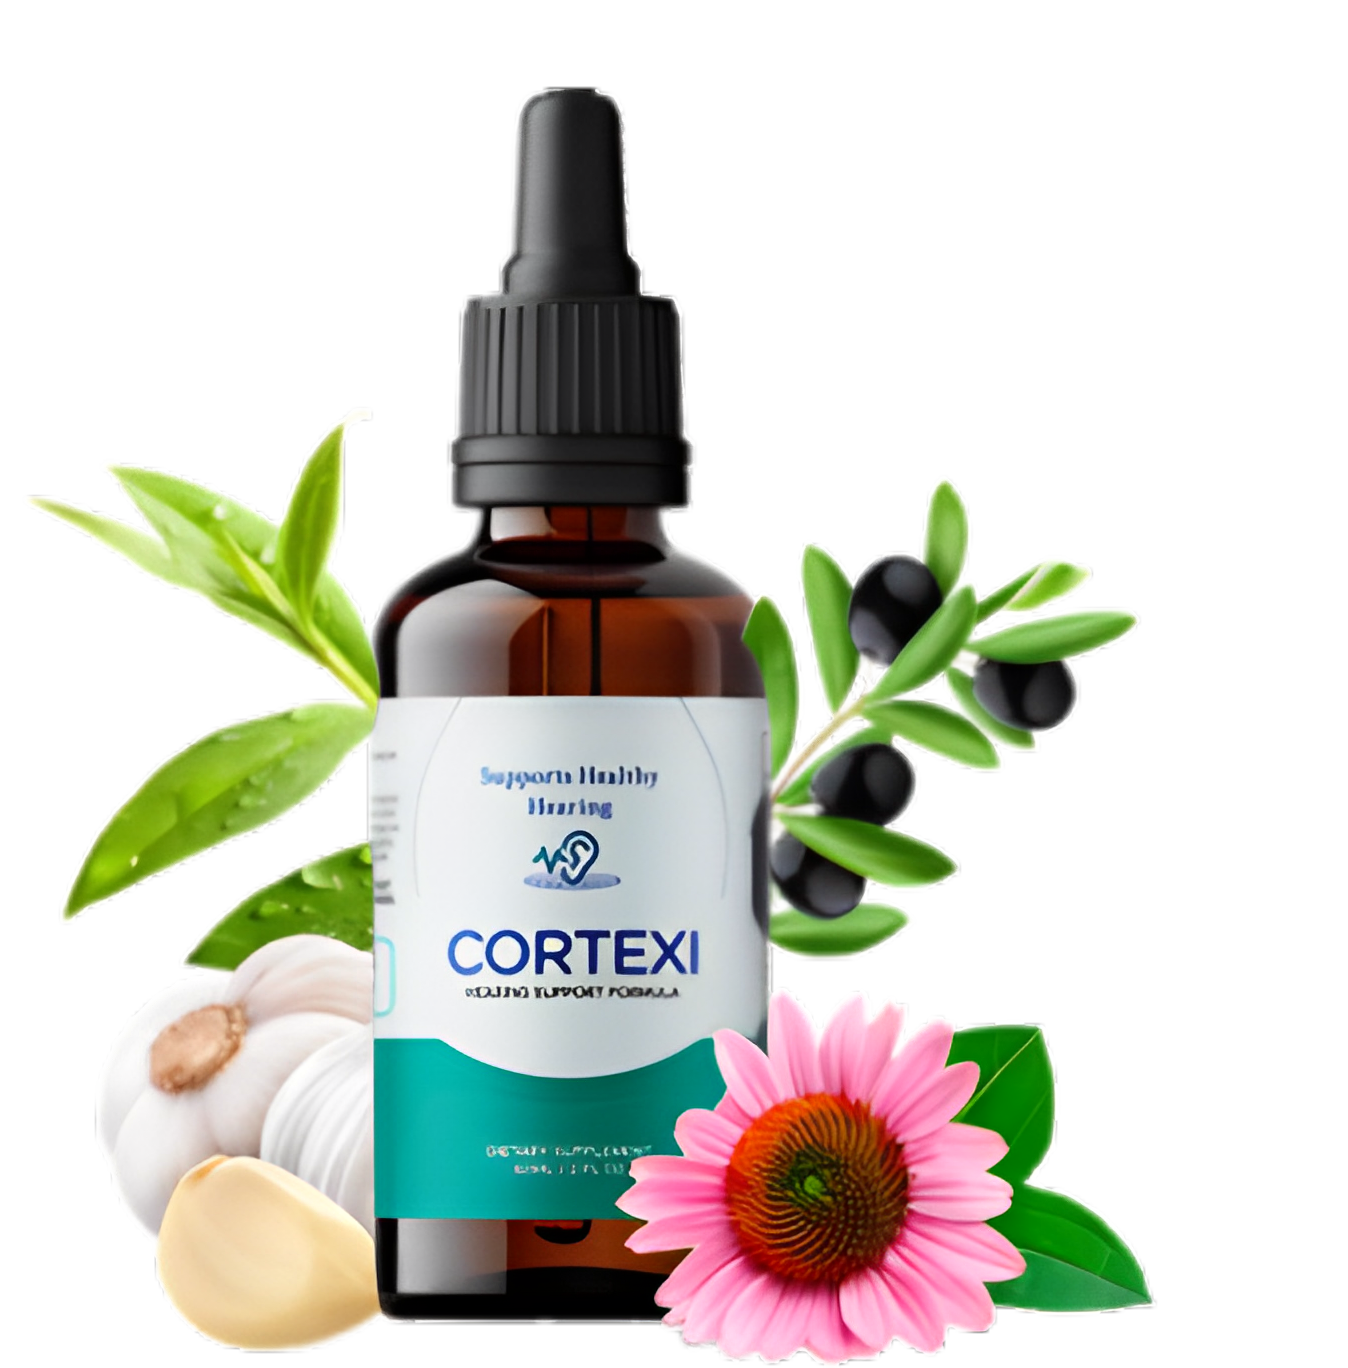 Improve Your Hearing Health Naturally with Cortexi - Buy Now